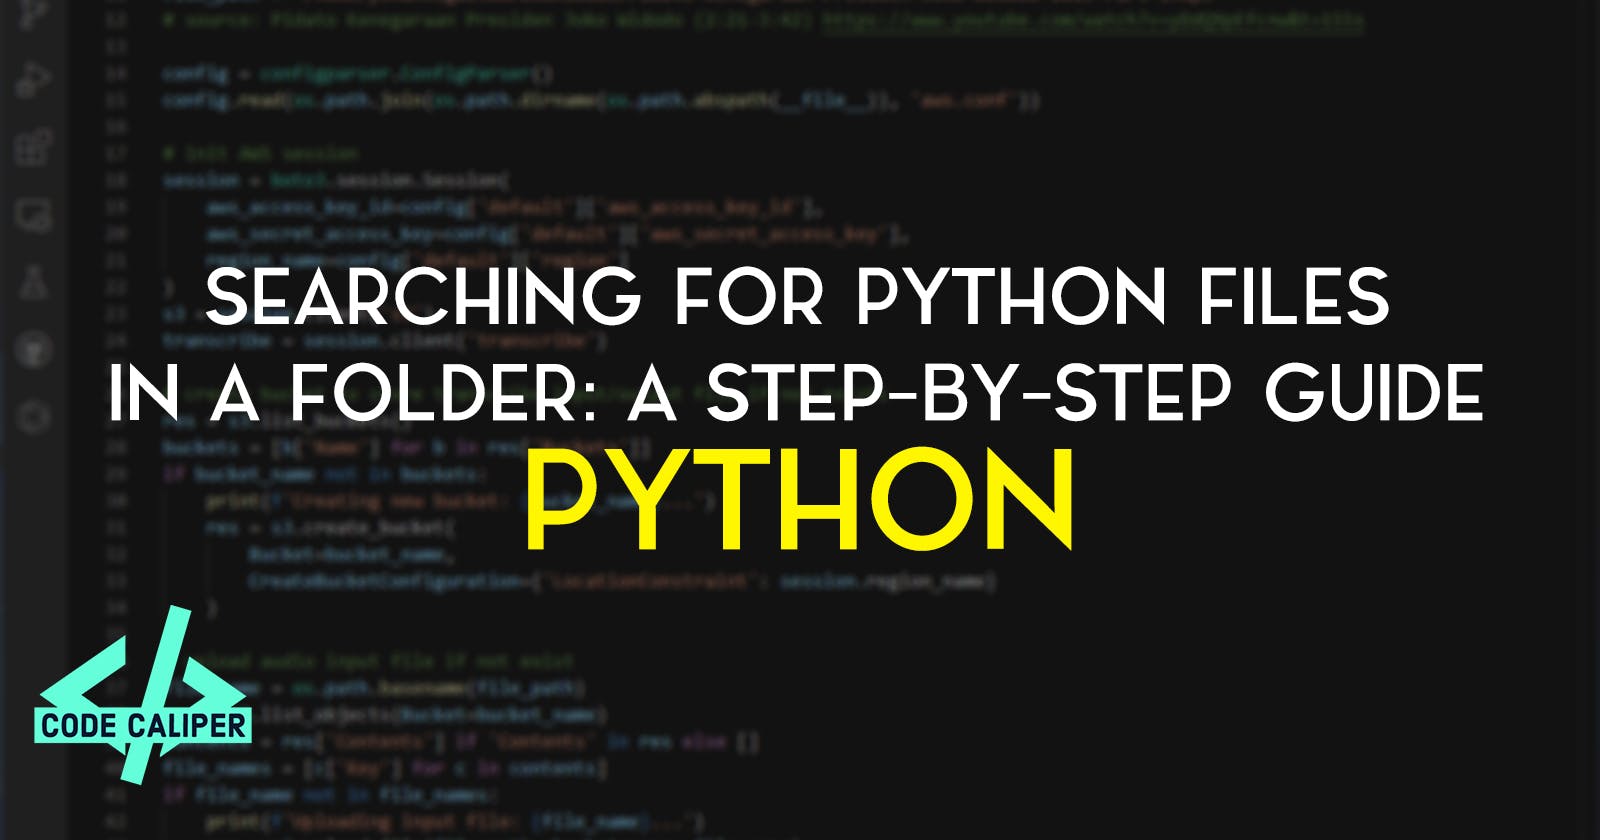 Searching for Python Files in a Folder: A Step-by-Step Guide